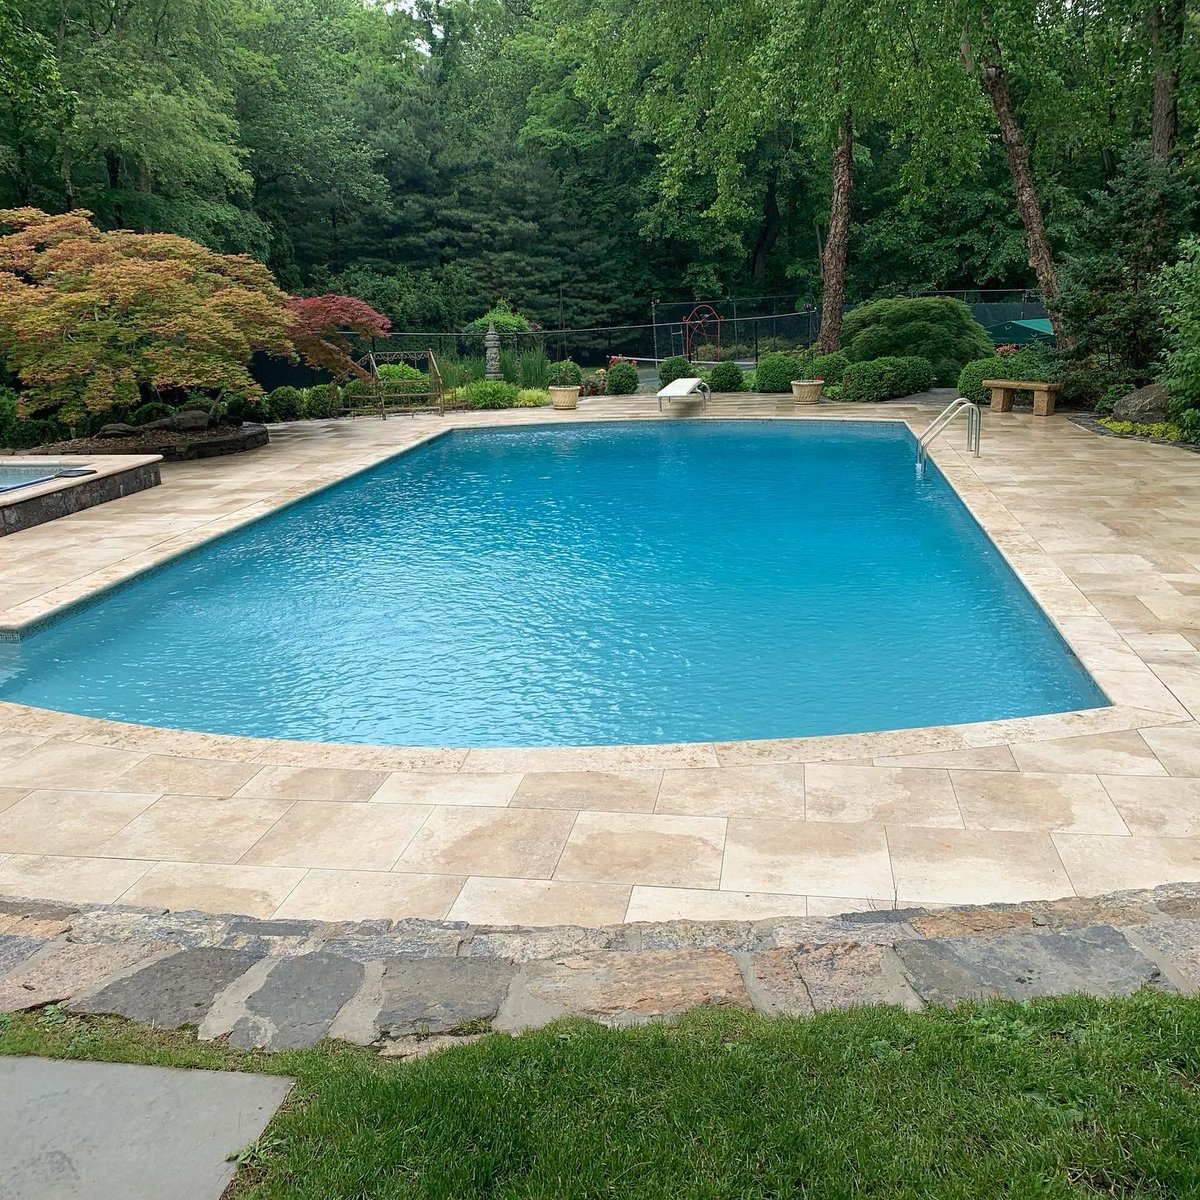 #Poolrenovation Services by our #expert #pool #contractor in #NewYork.
Visit: angels-pools.com
 #poolservice #poolservices #swimmingpoolservice #bestpoolservice #mmpoolservice #atopoolservices #chlorinekingpoolservice #oasis #water #miami #pools #swimming #spa #backyard